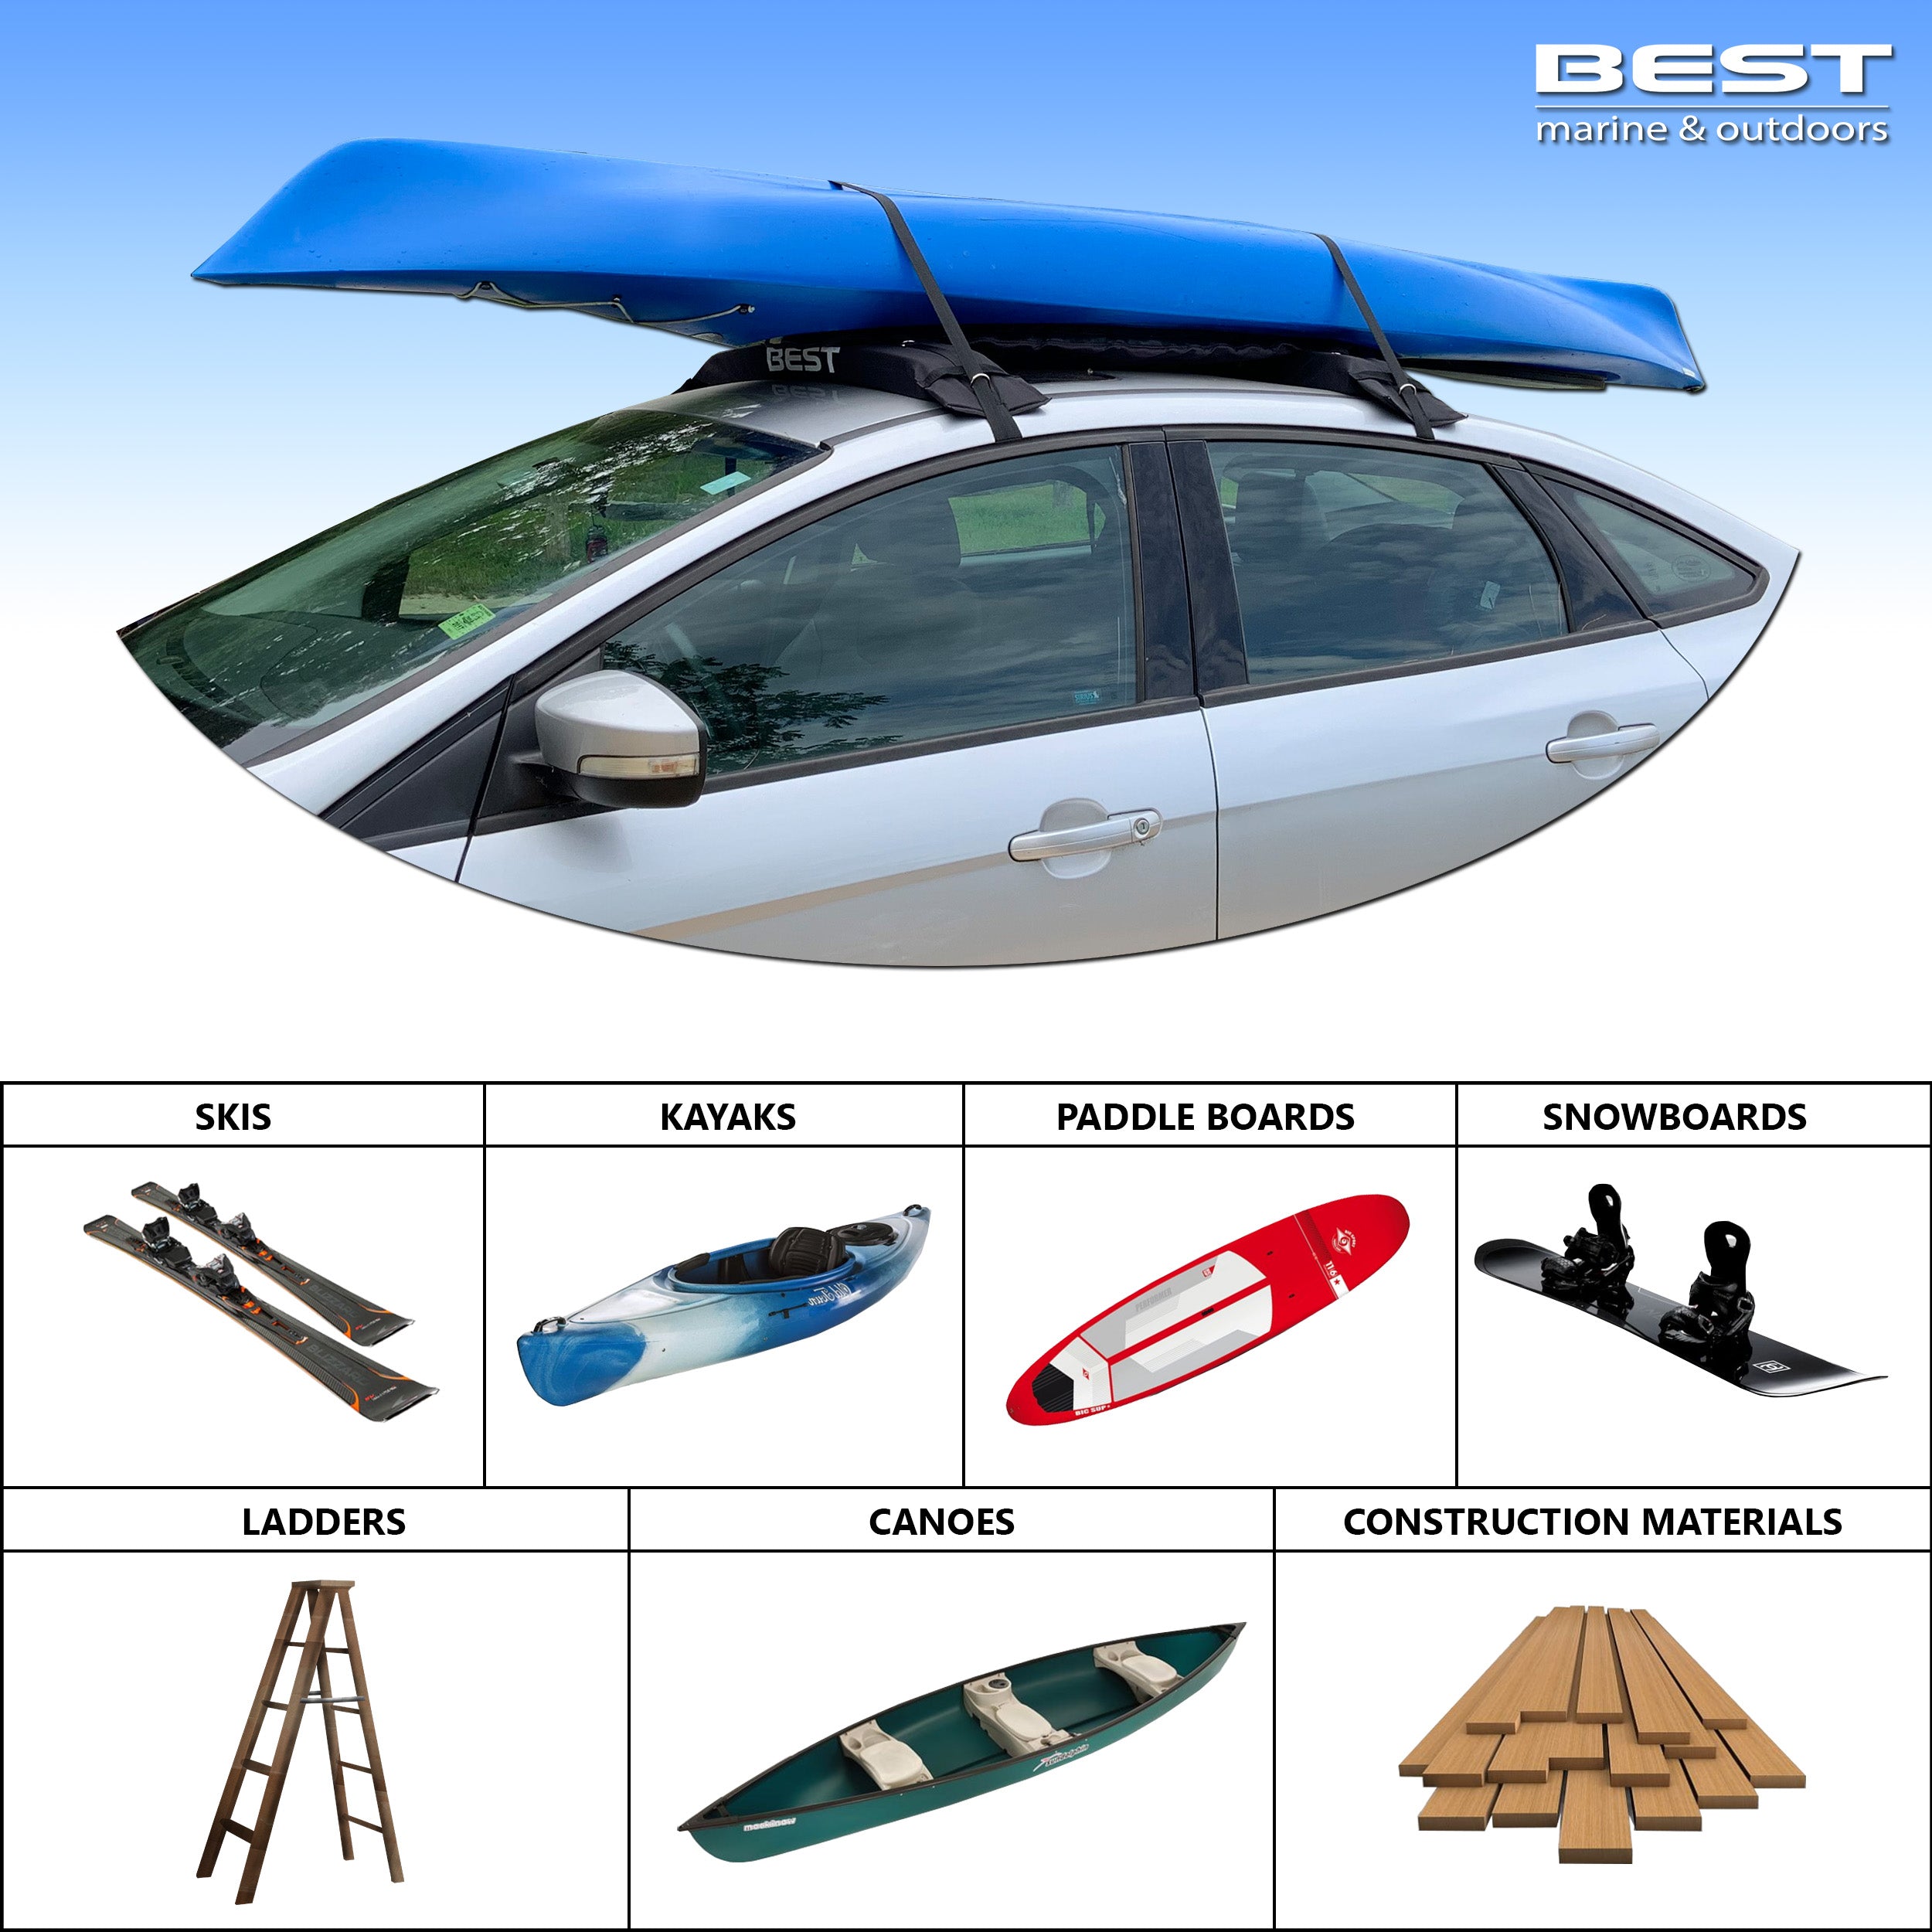 Best Marine and Outdoors Best Marine Roof Rack Pads 38' Universal Roof Rack Carrier for Kayaks Canoe Sup Paddle Board Surfboard & Luggage XL Kayak